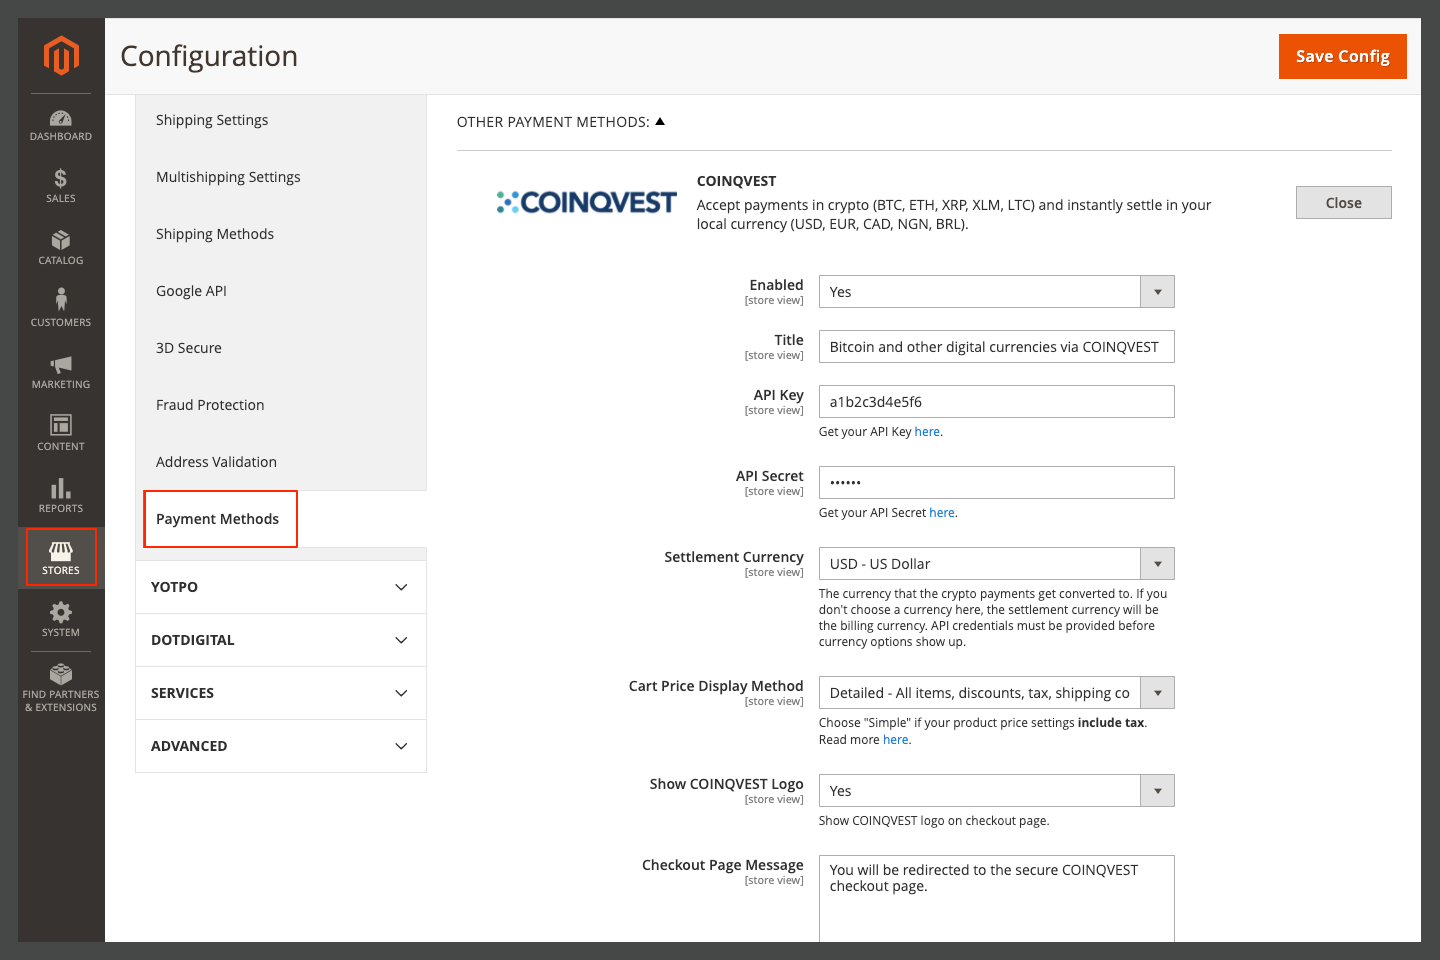 COINQVEST Payment Method Settings in Magento Admin Area